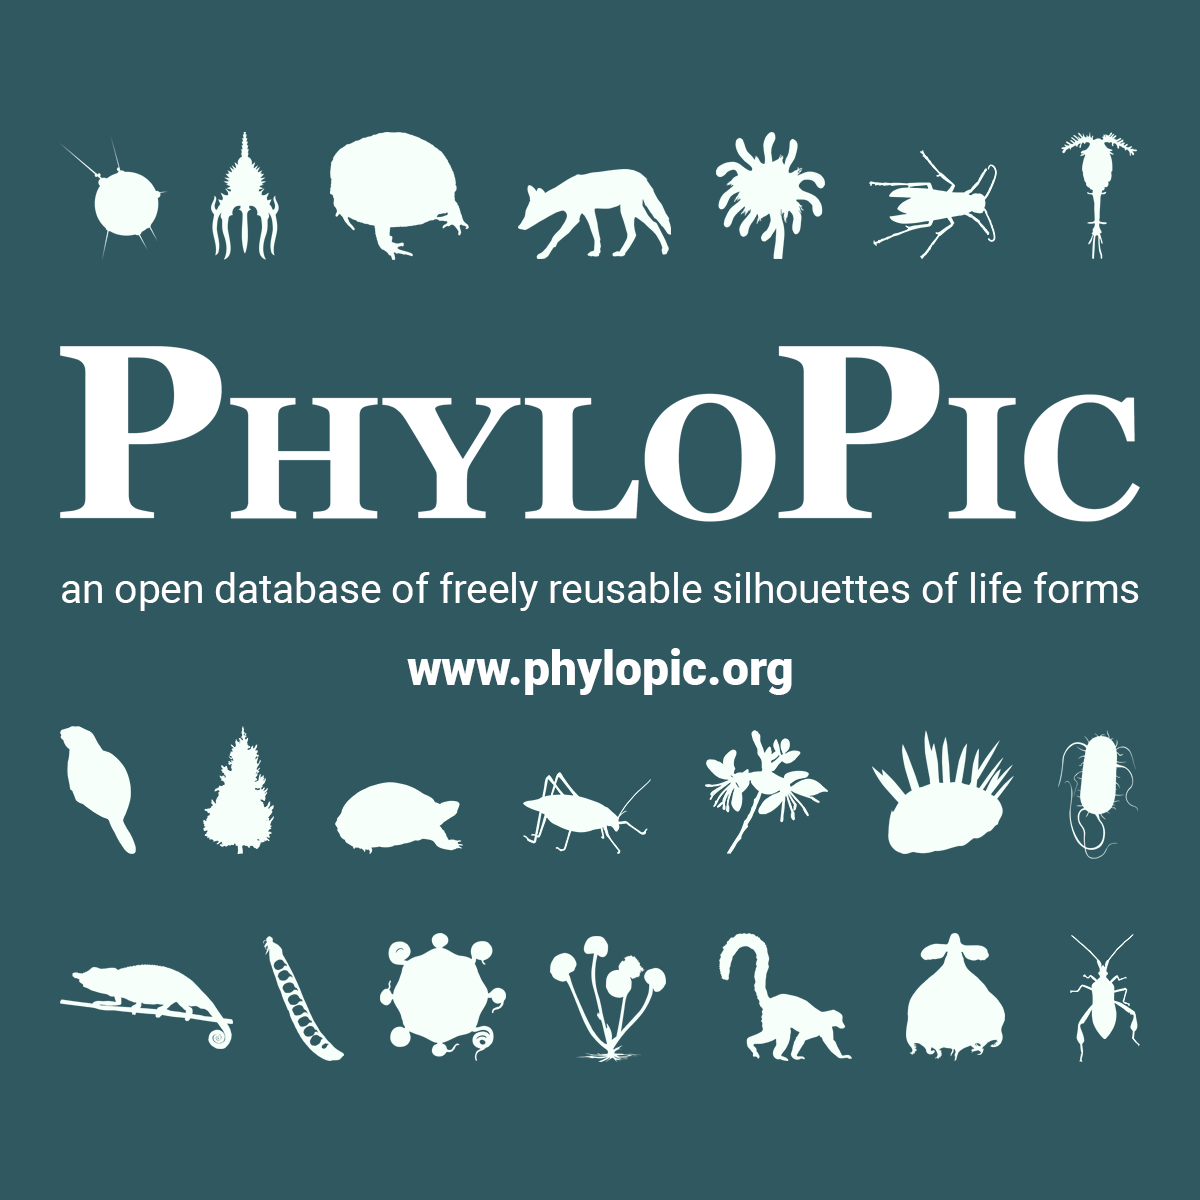 (c) Phylopic.org